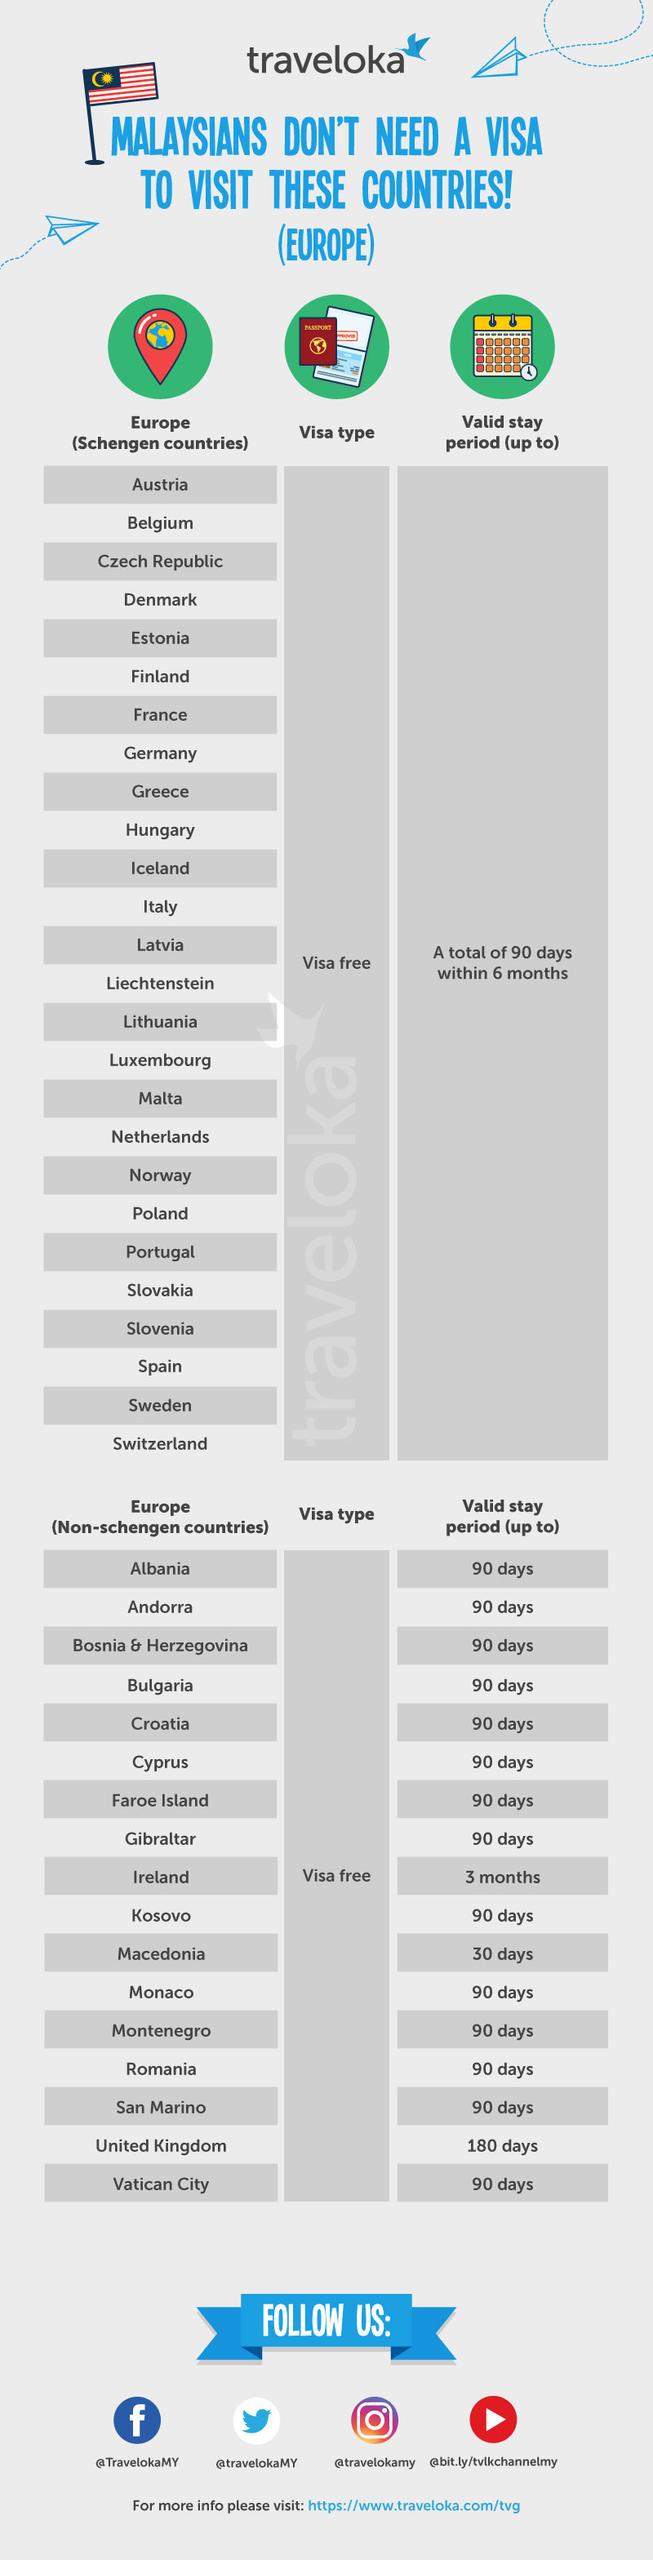 Visa Requirements for Malaysians to Visa-Free Countries in Europe